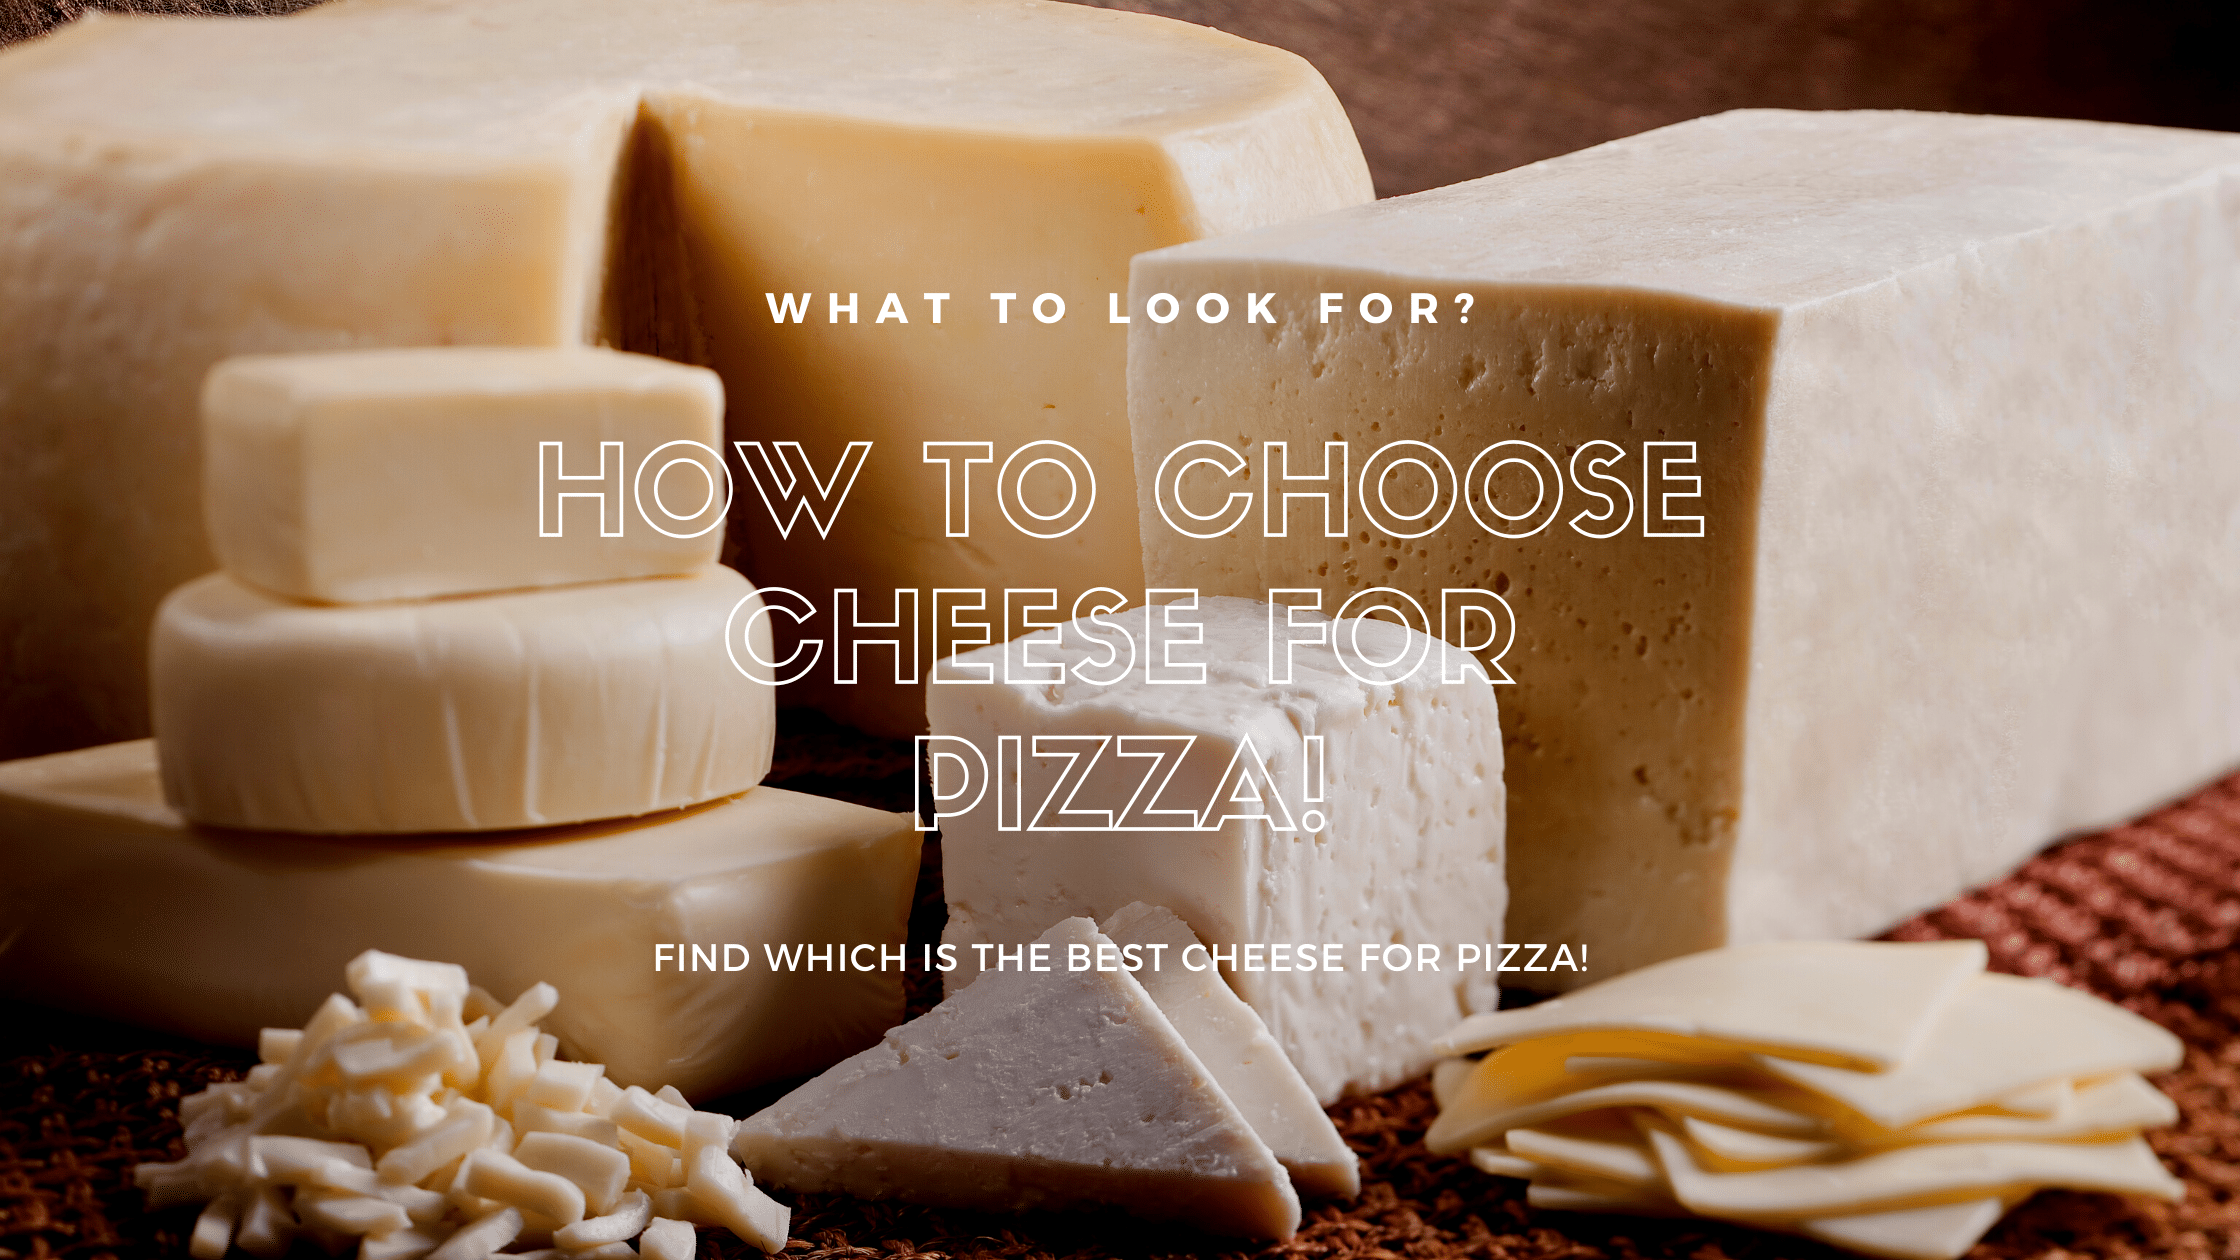 How to Choose Cheese for Pizza: Find Which is the Best Cheese?